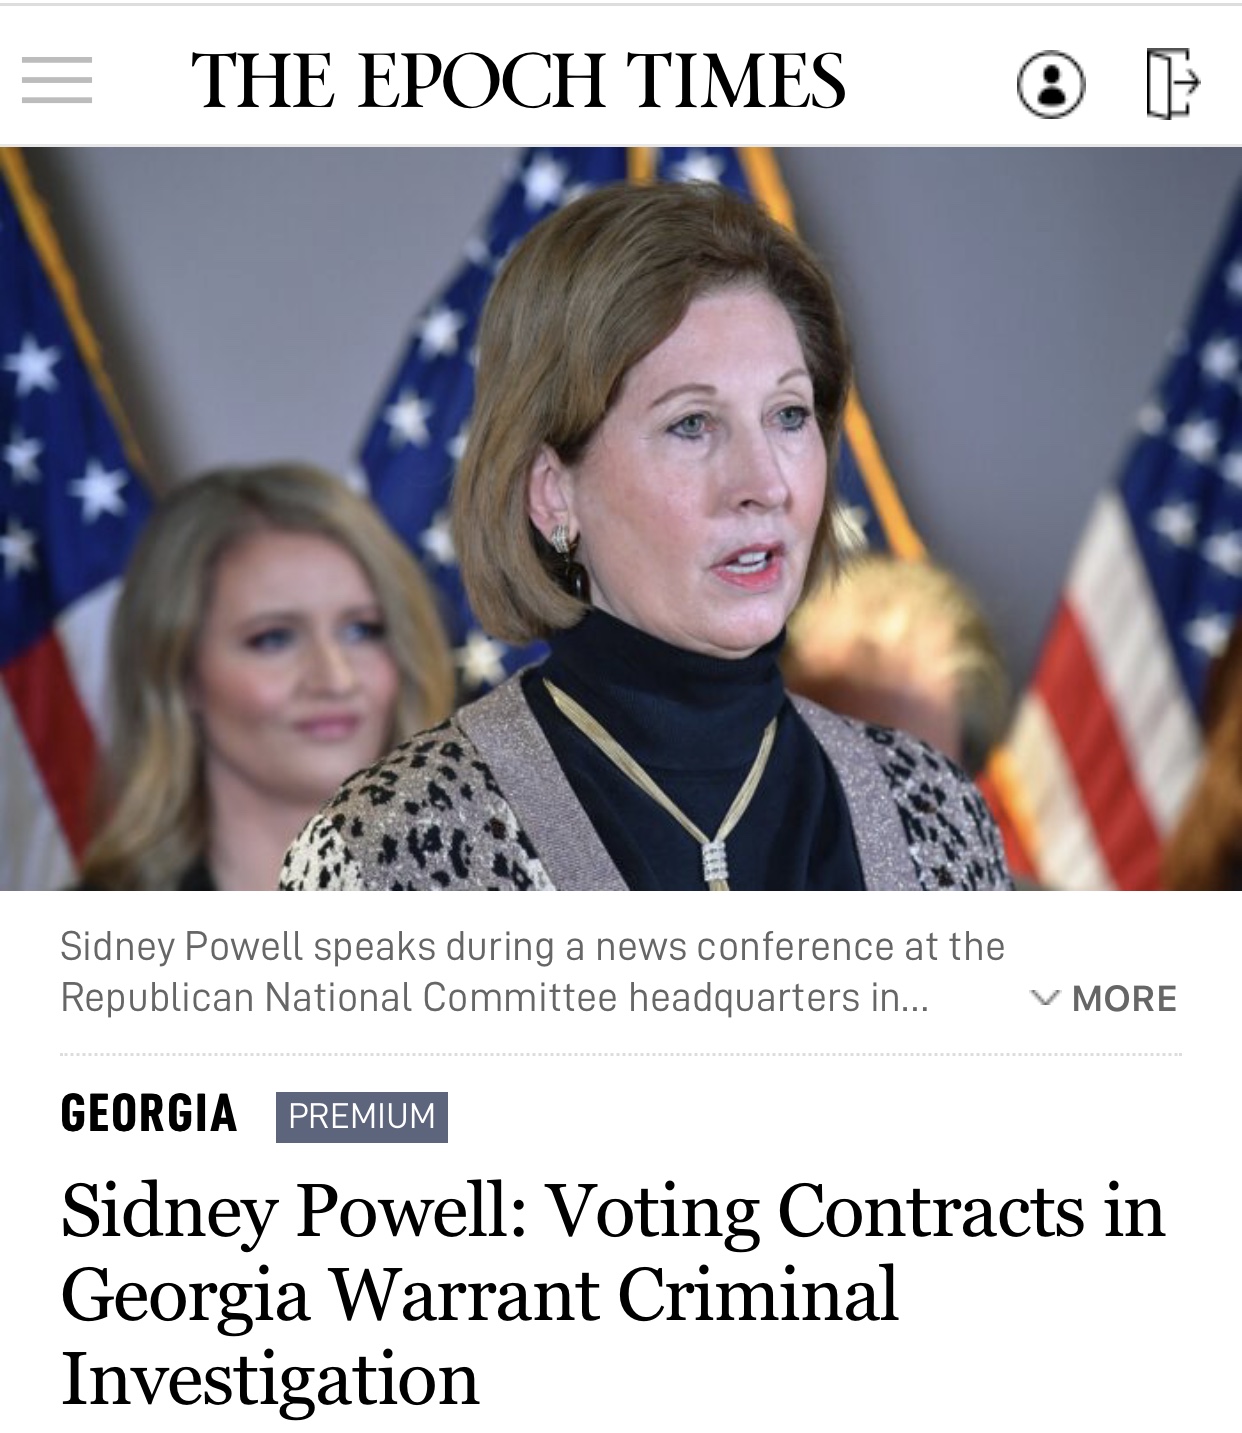 Sidney Powell: Voting Contracts in Georgia Warrant Criminal Investigation